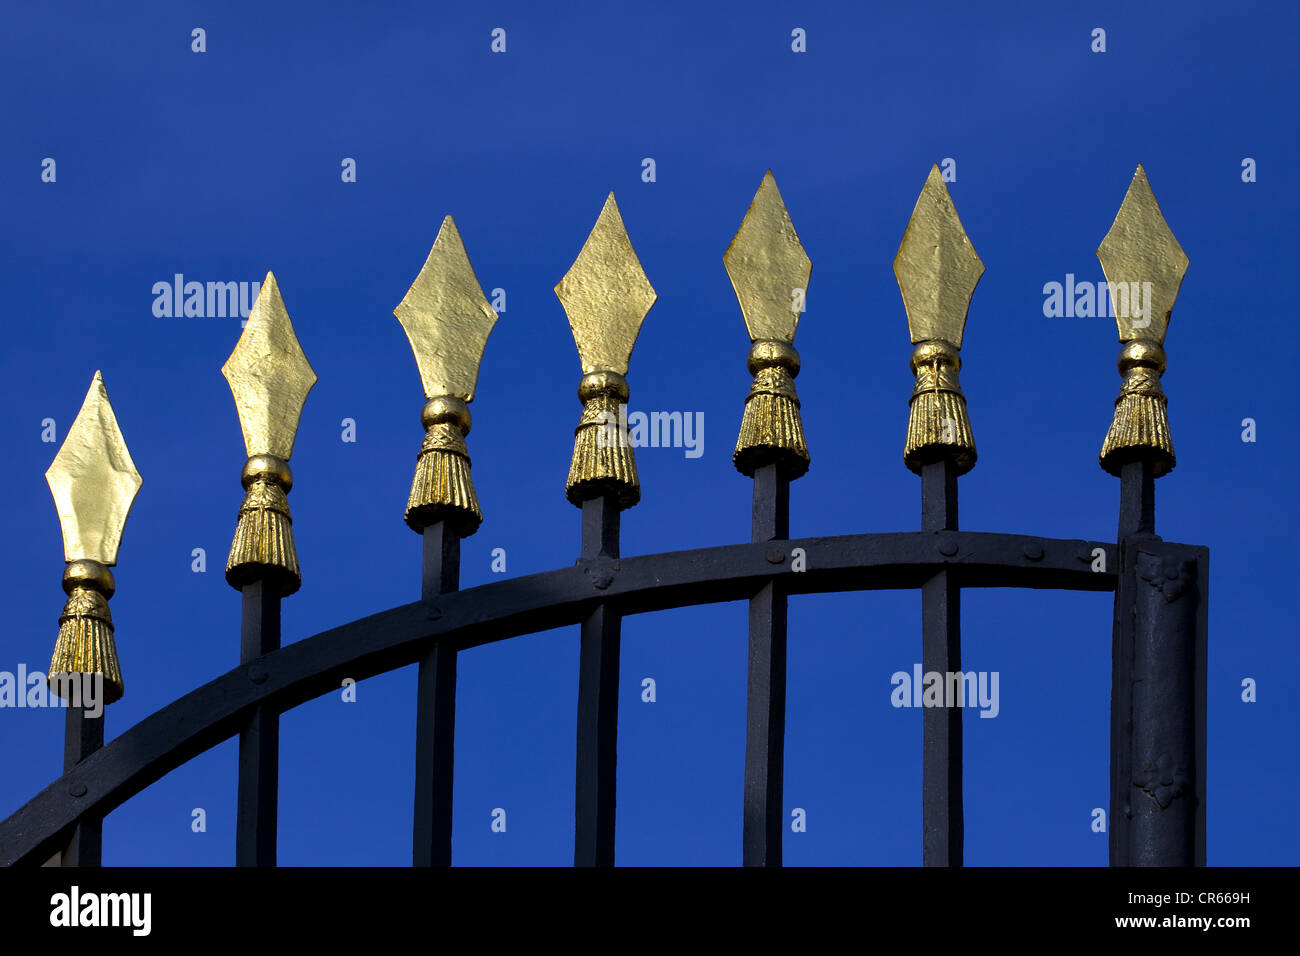 Fence bars with gold-colored heads Stock Photo